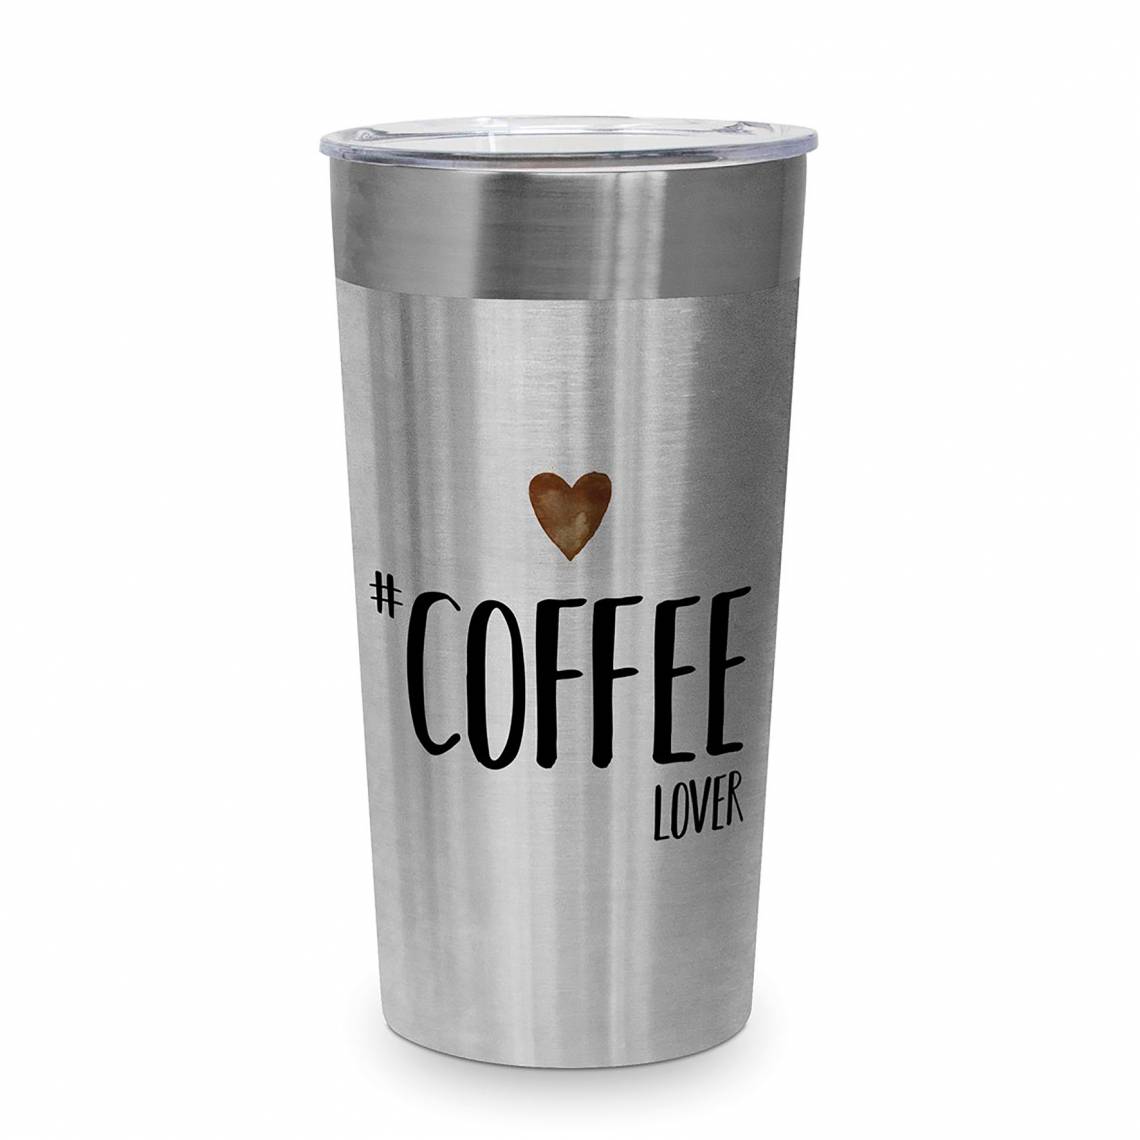 ppd 604375 Coffee Lover, Stainless Steel Travel Mug, 0,4l